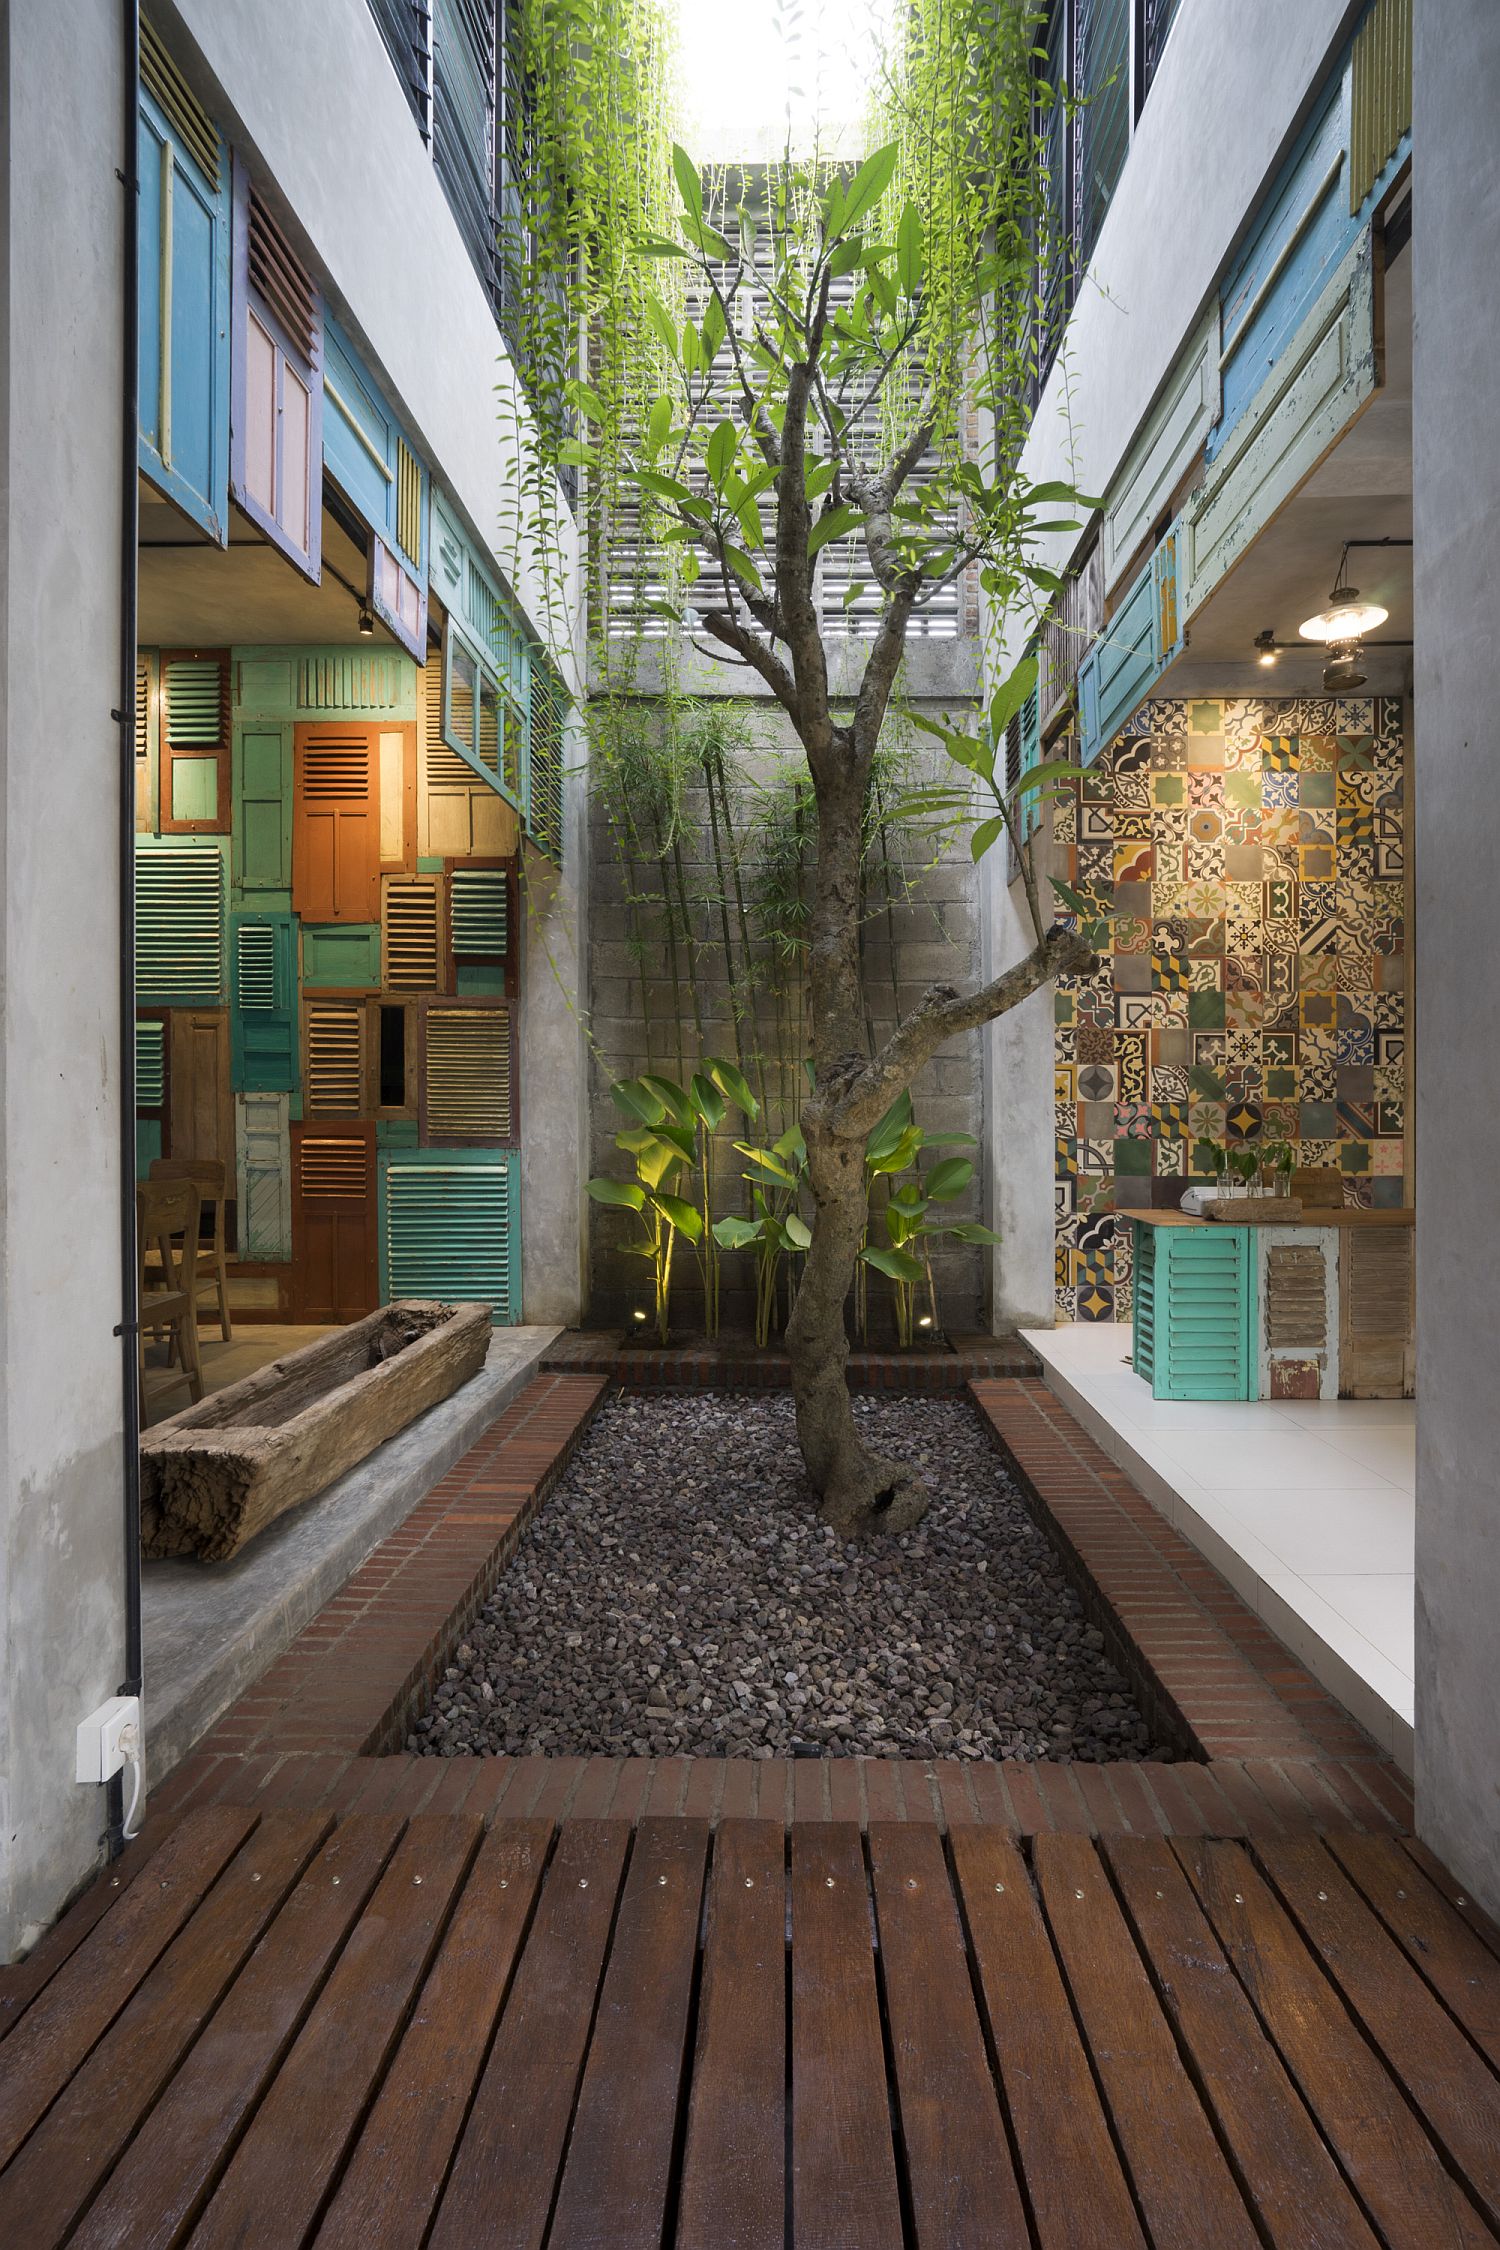 Central-yard-of-the-Indonesian-home-with-vintage-wooden-elements